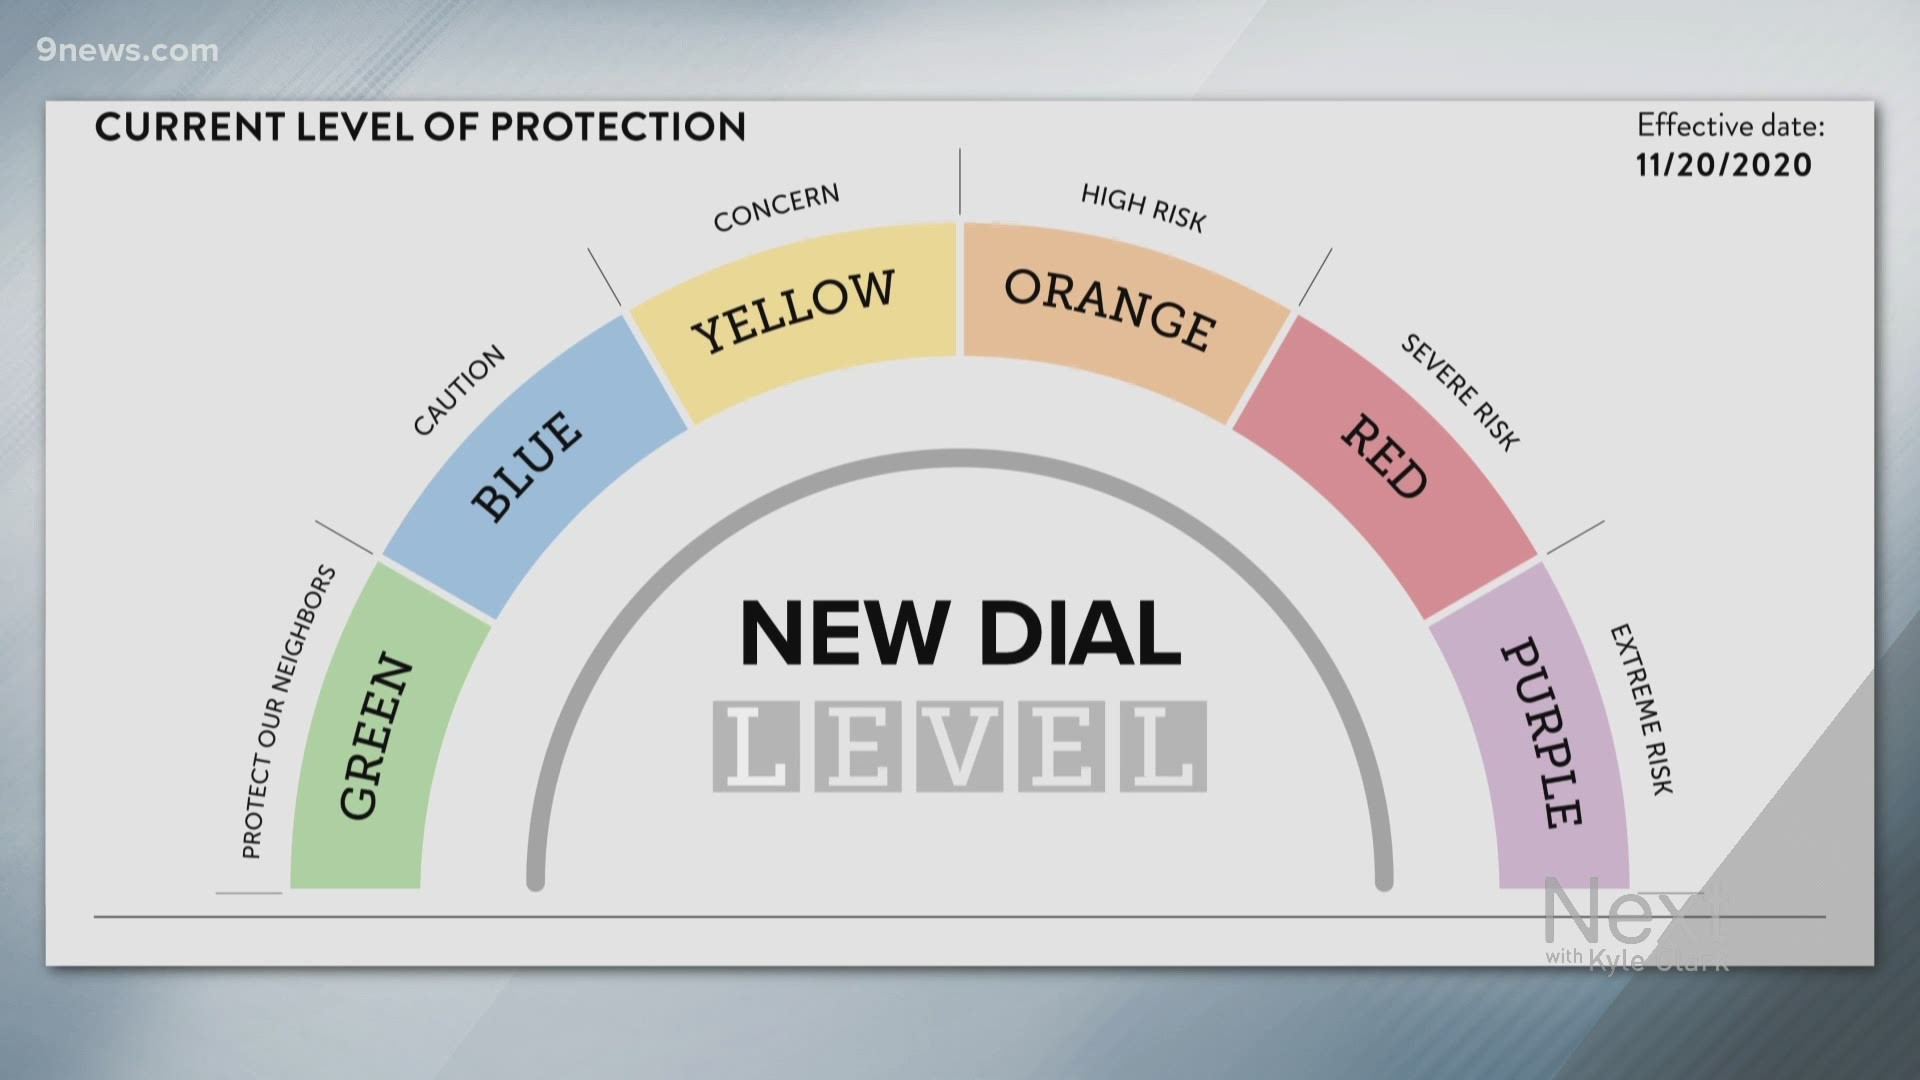 With cases surging, the COVID dial got a refresh as one last step before a stay-home order. This is what the updated red level and the brand new purple level mean.